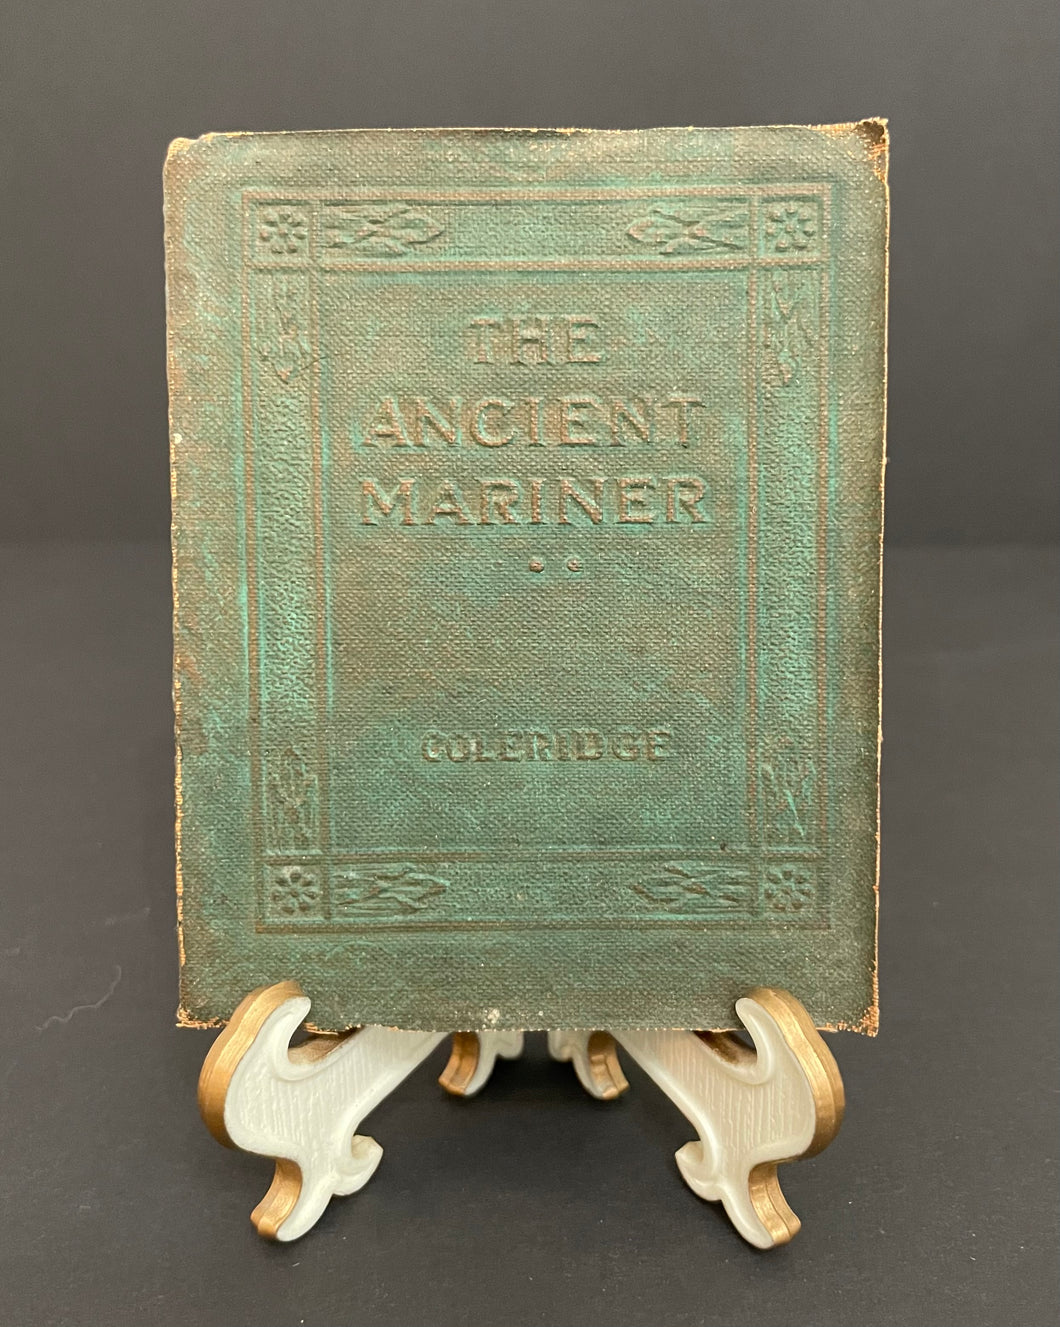 Antique Little Leather Library “The Ancient Mariner” by Coleridge Book